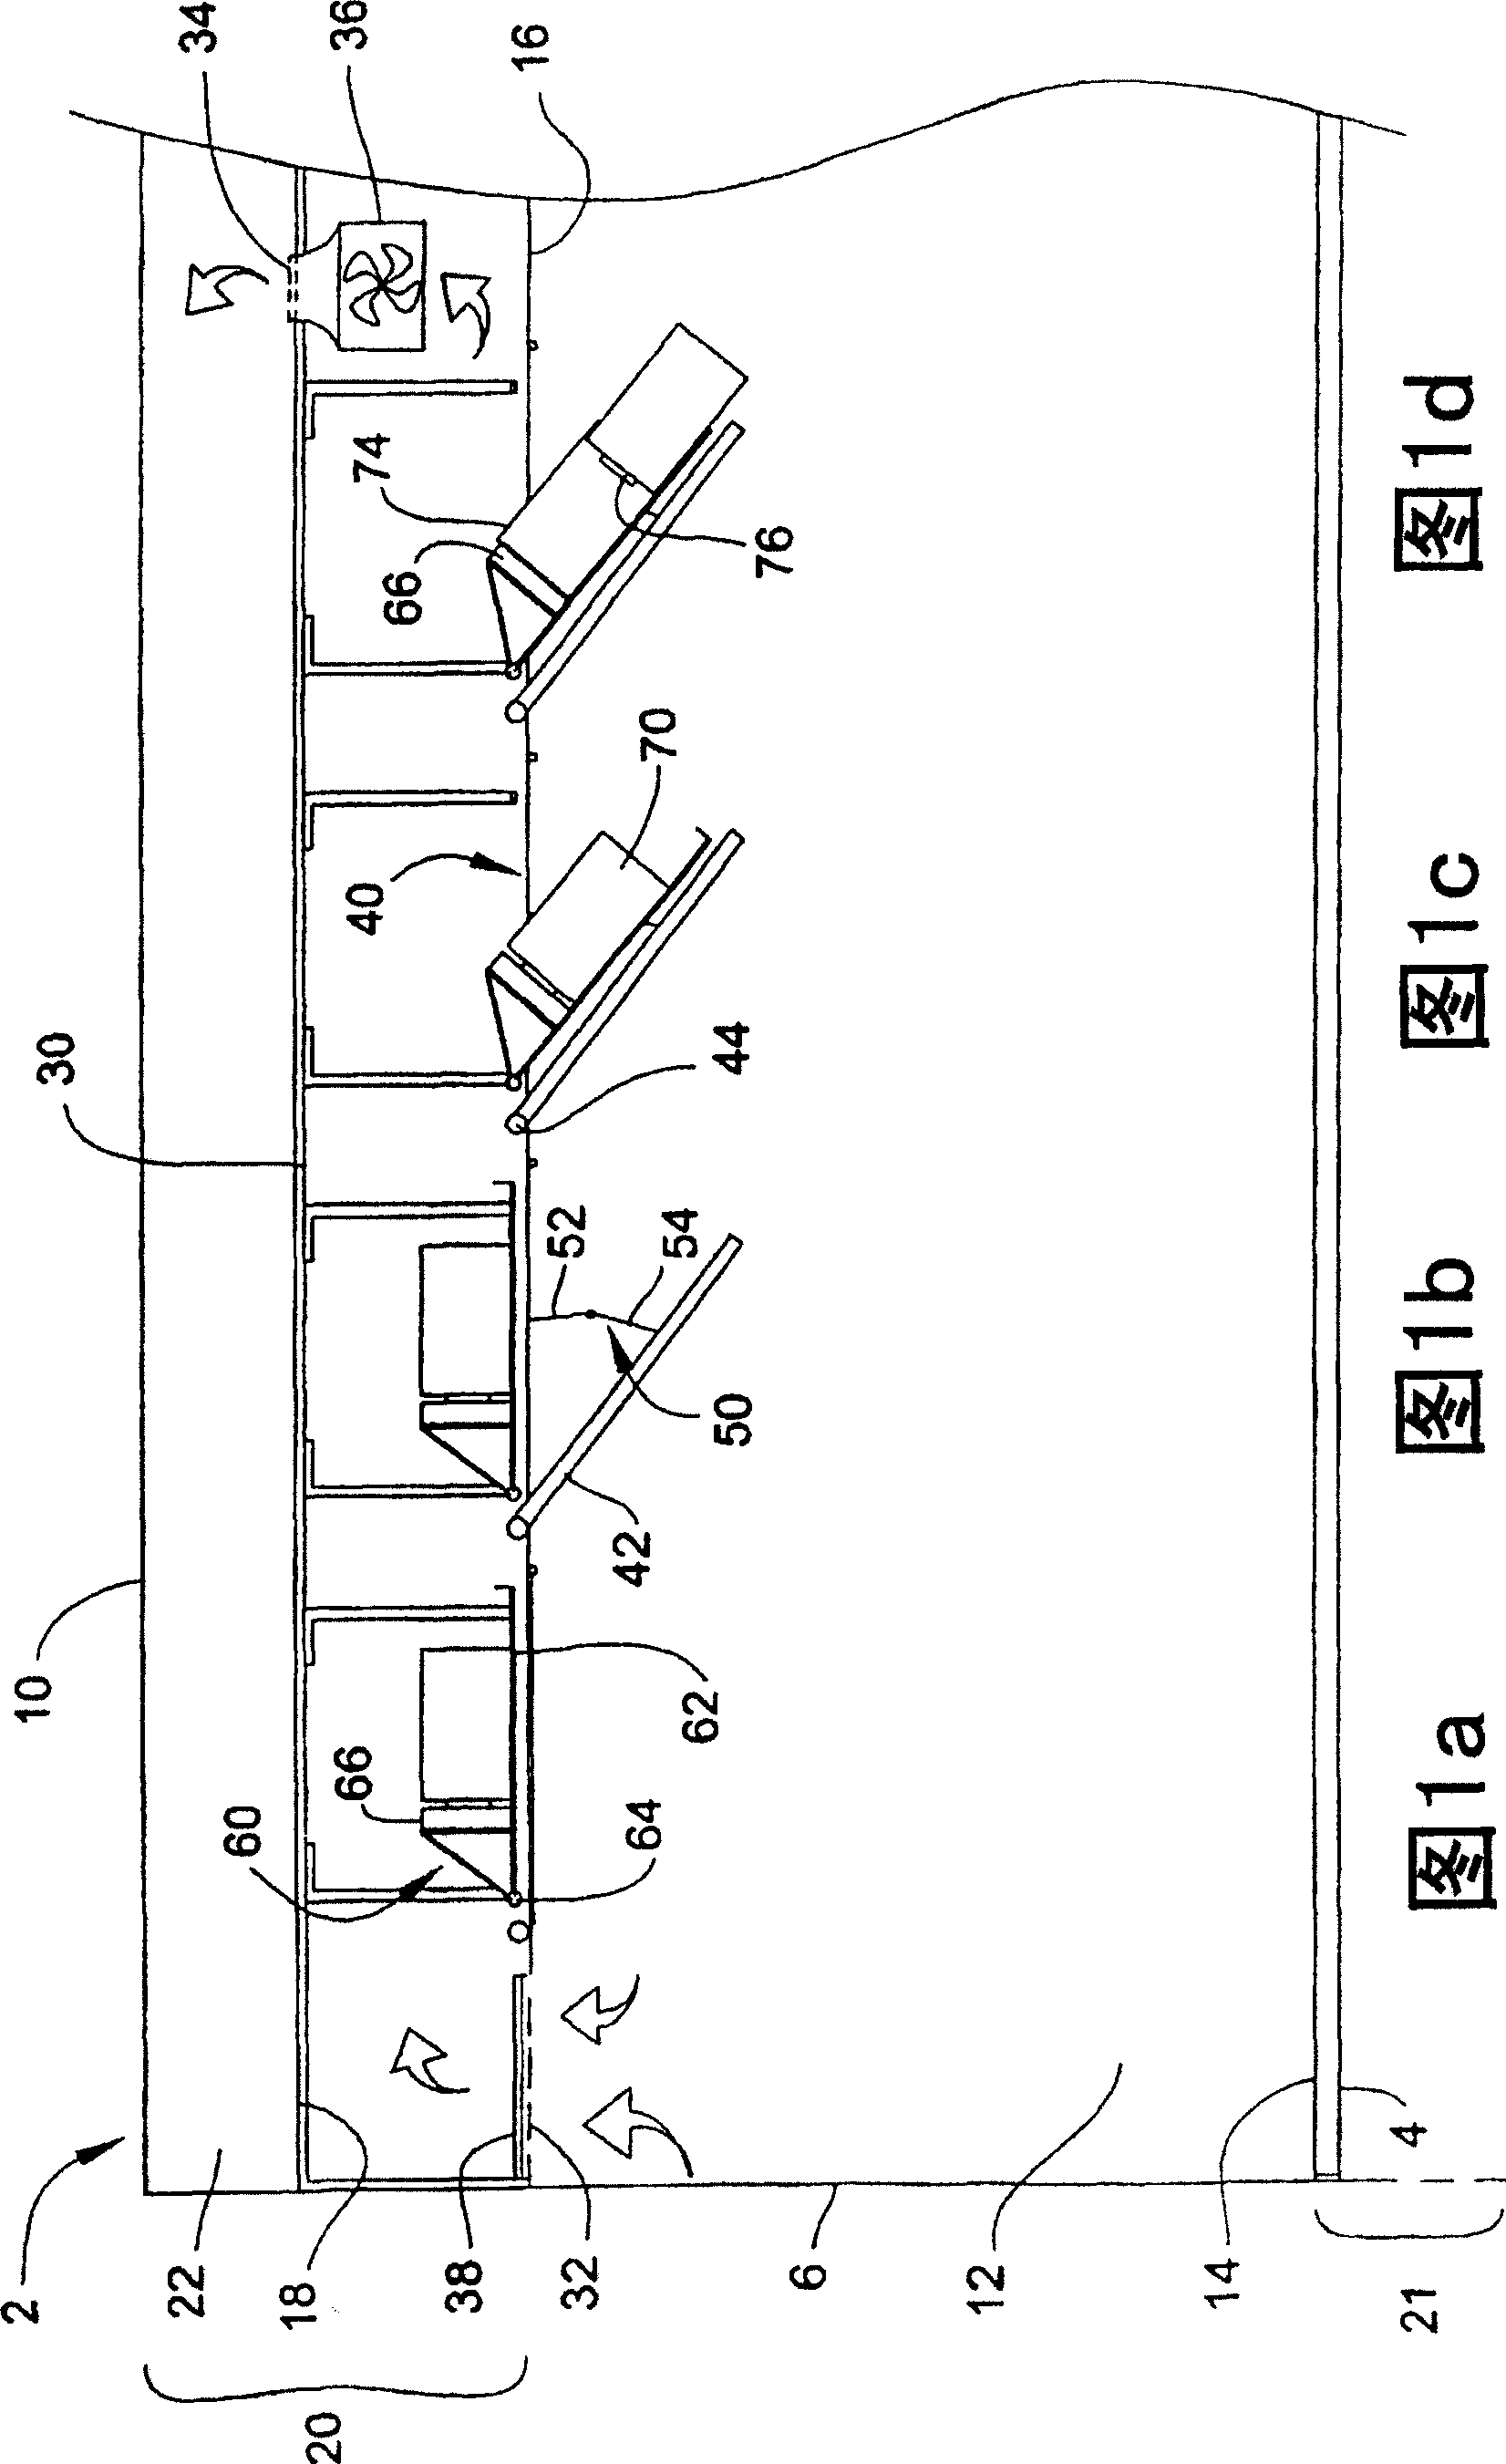 Storage system for electrical equipment in vehicles